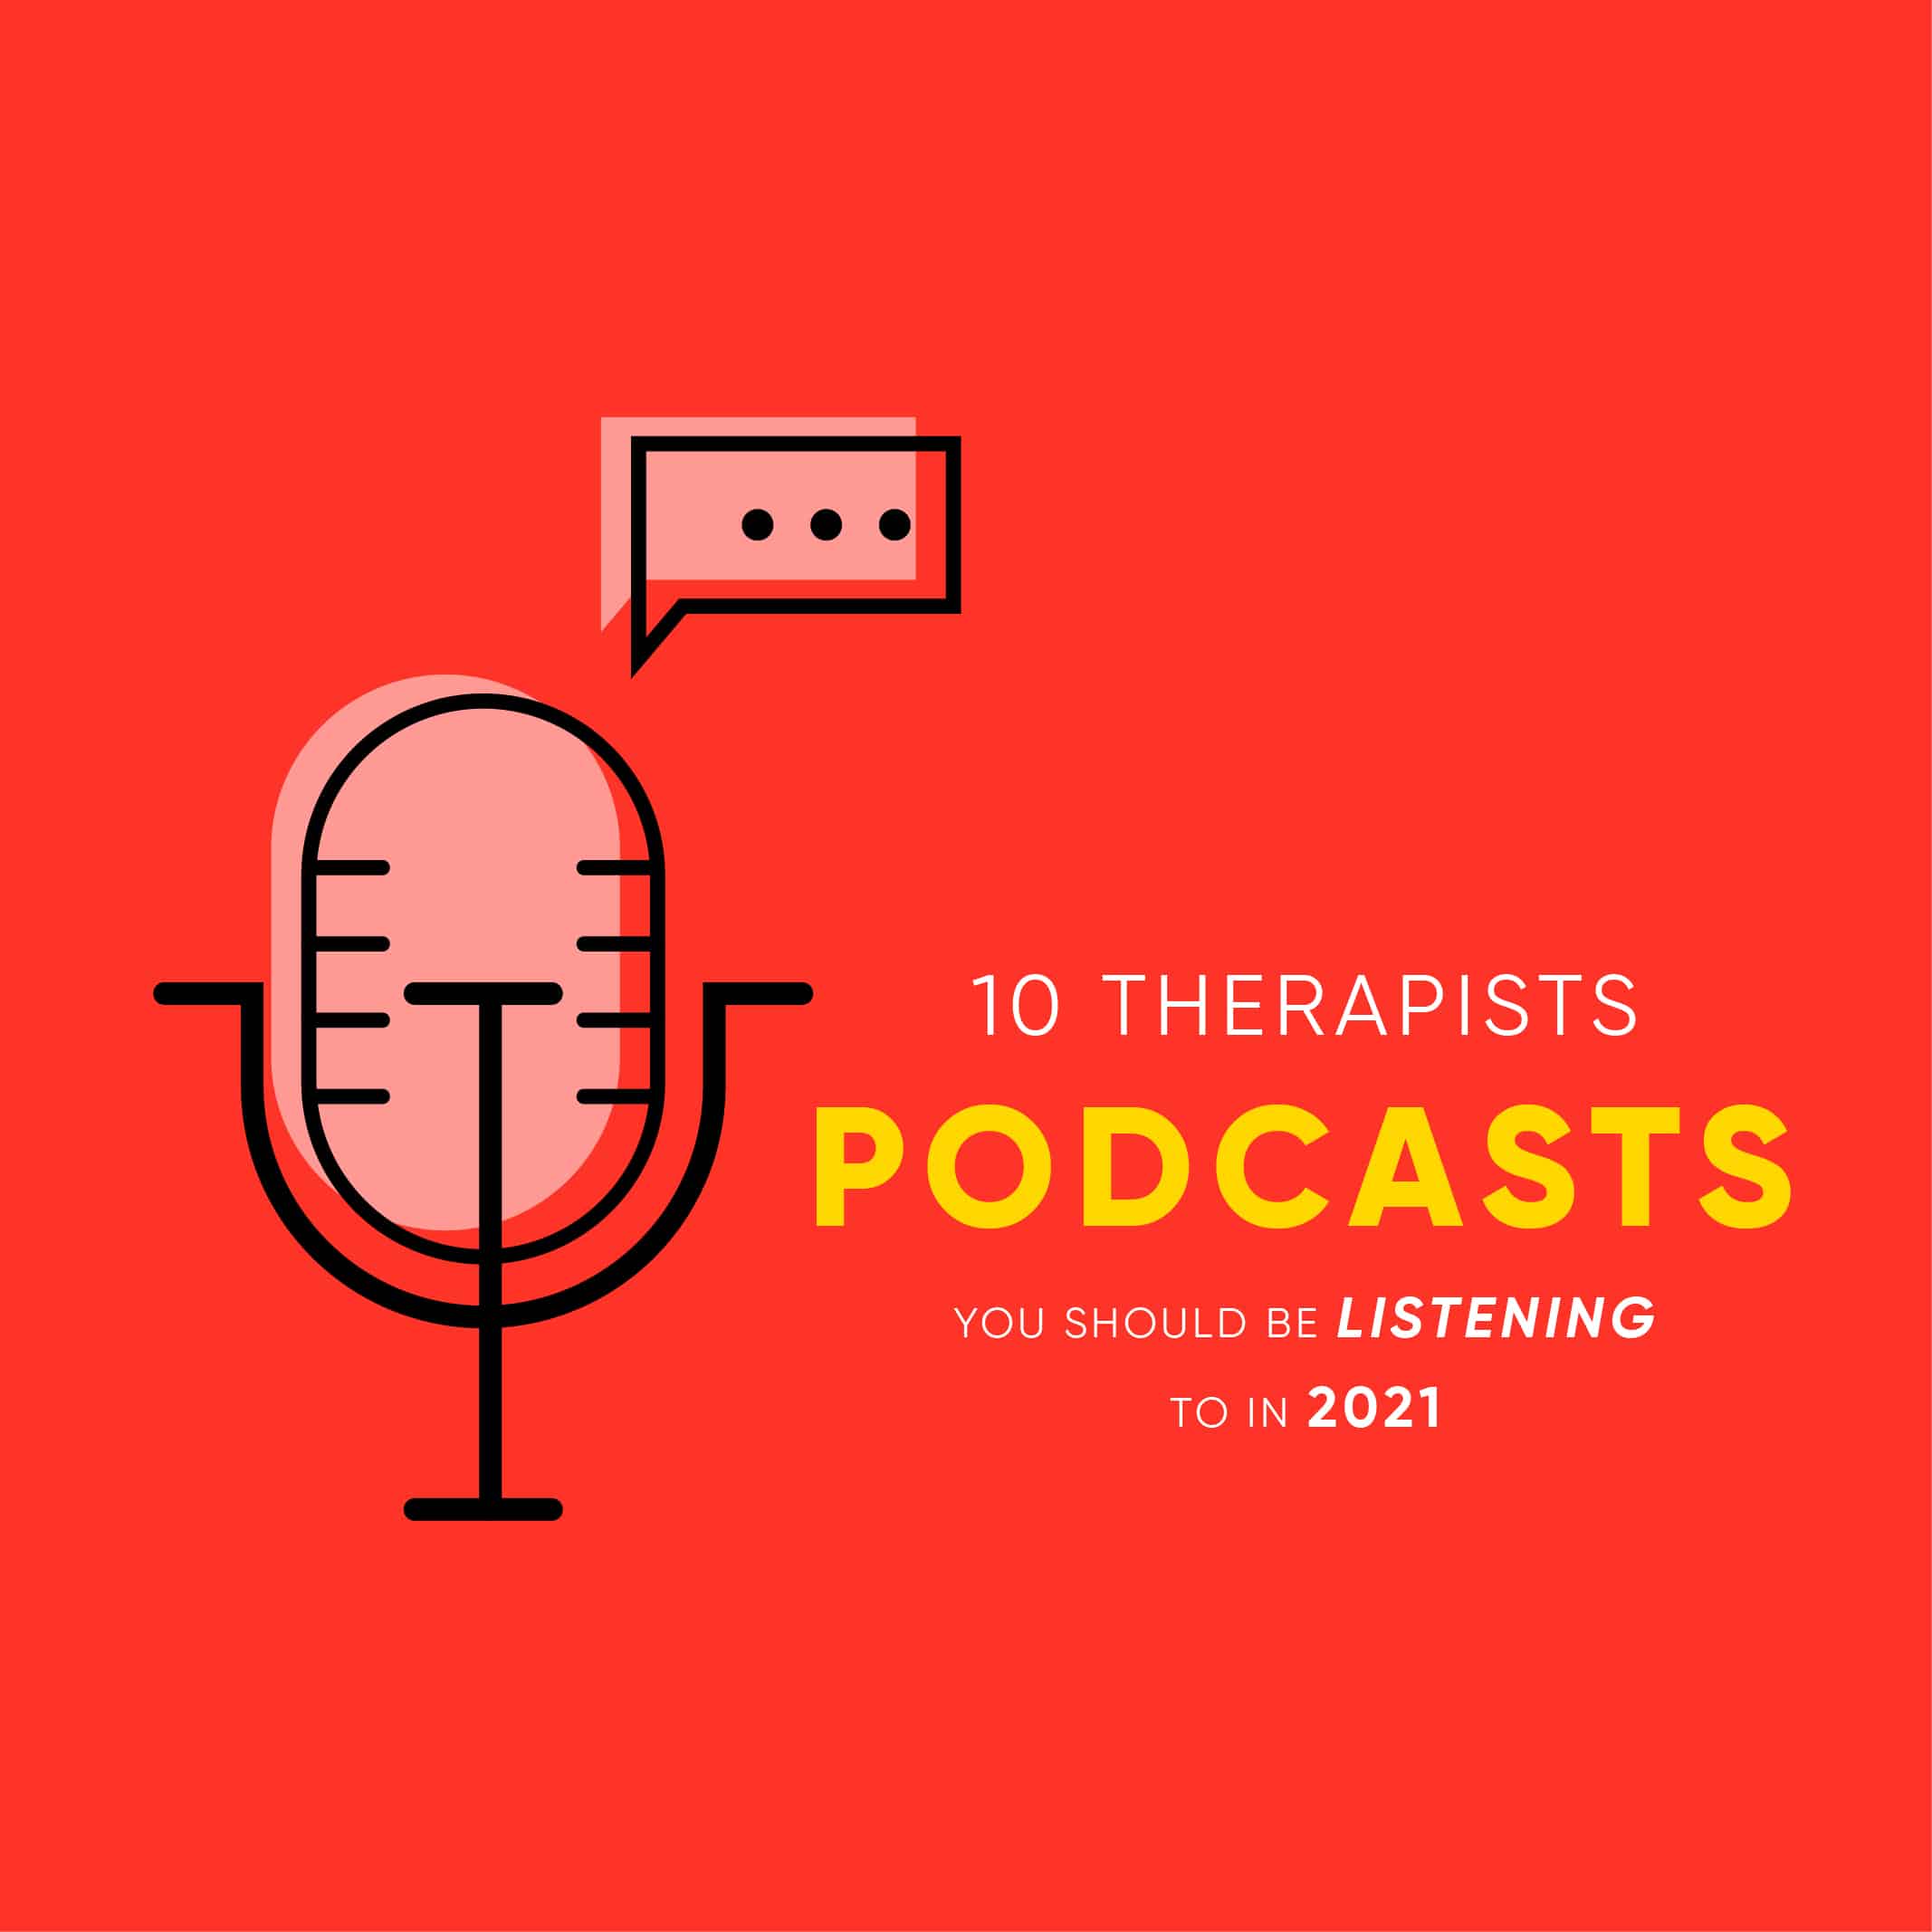 10 Therapist Podcasts You Should Be Listening to in 2021